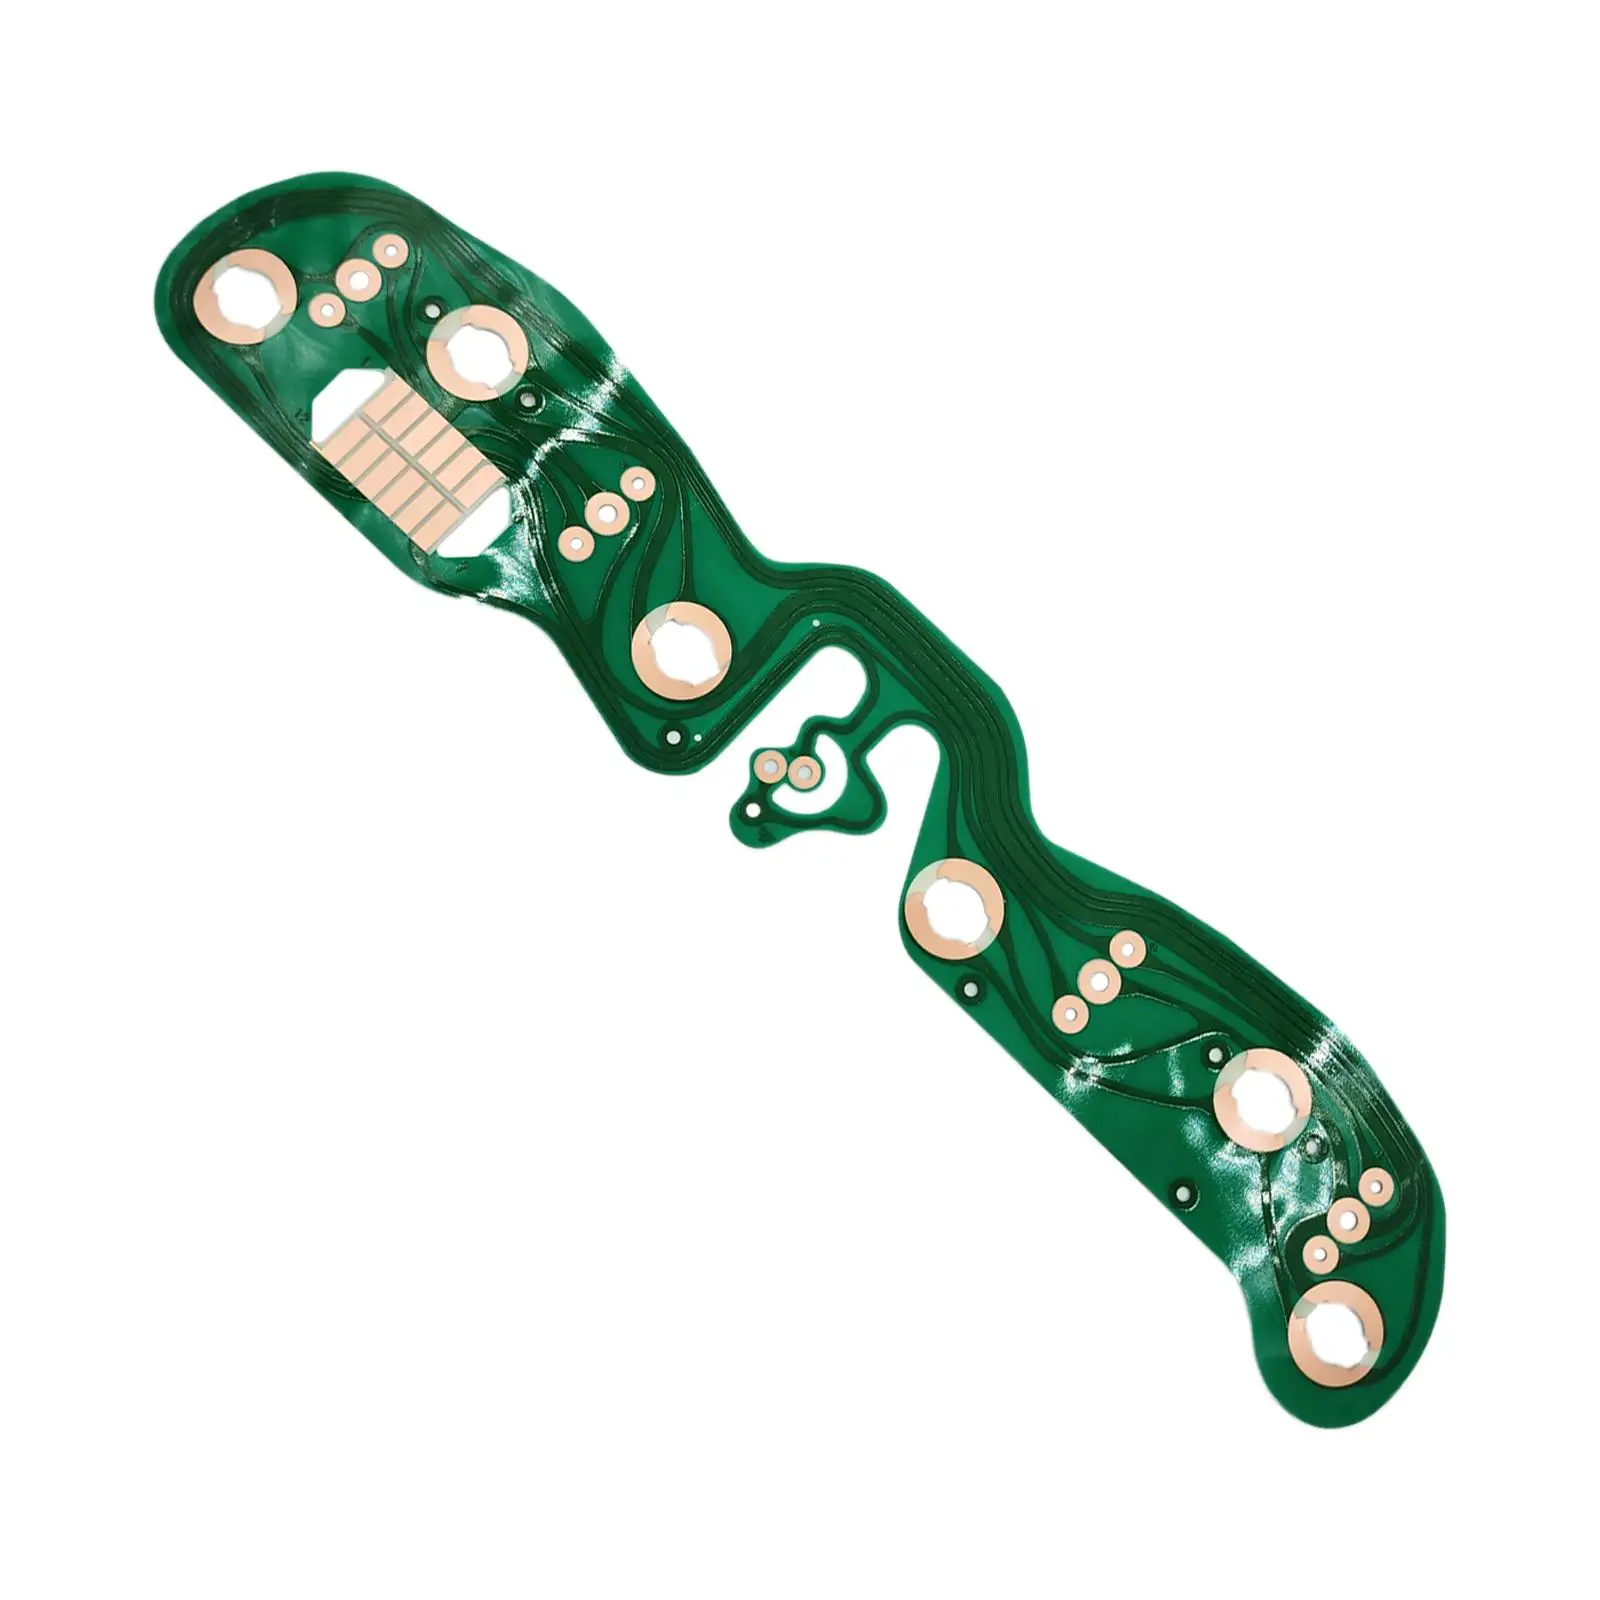 Gauges Printed Circuit Board for High Performance Parts